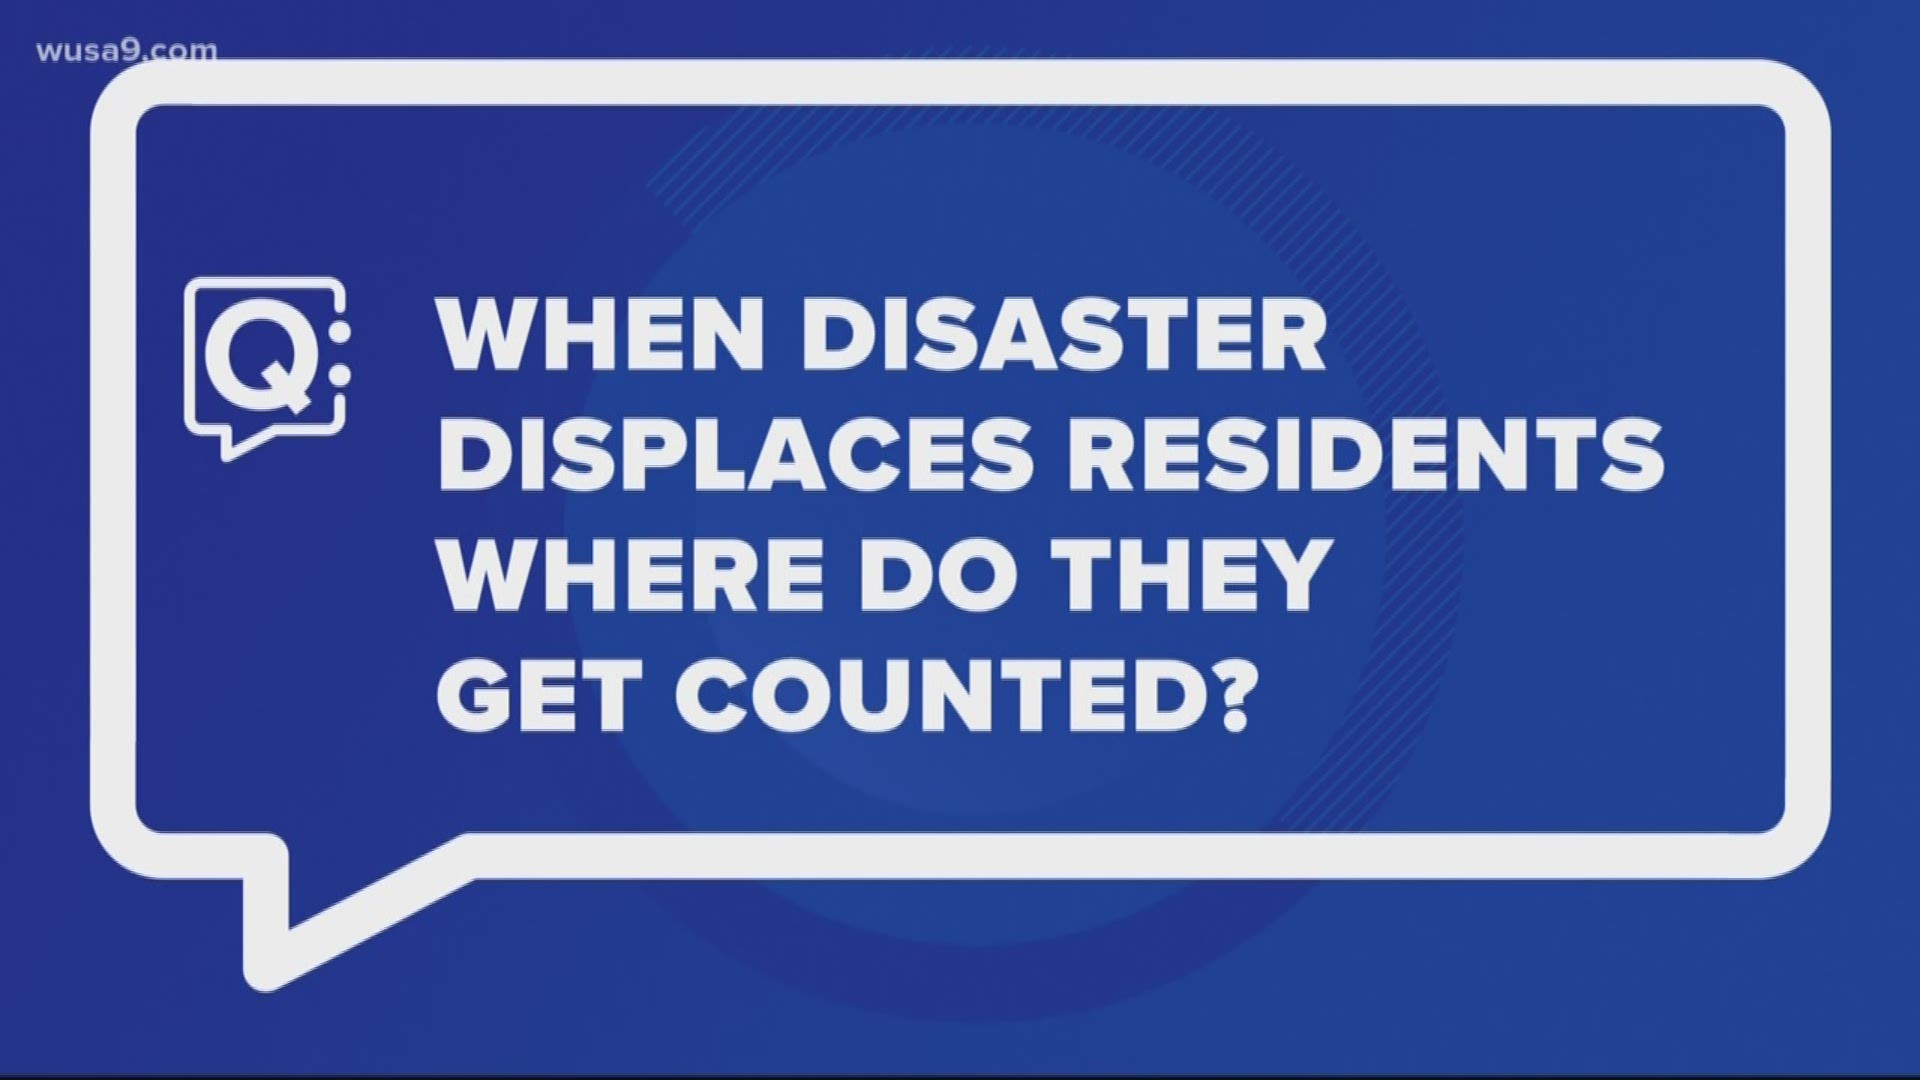 Recent natural disasters have devastated many communities across the country. The Census Bureau answers the question of how the displaced will be counted